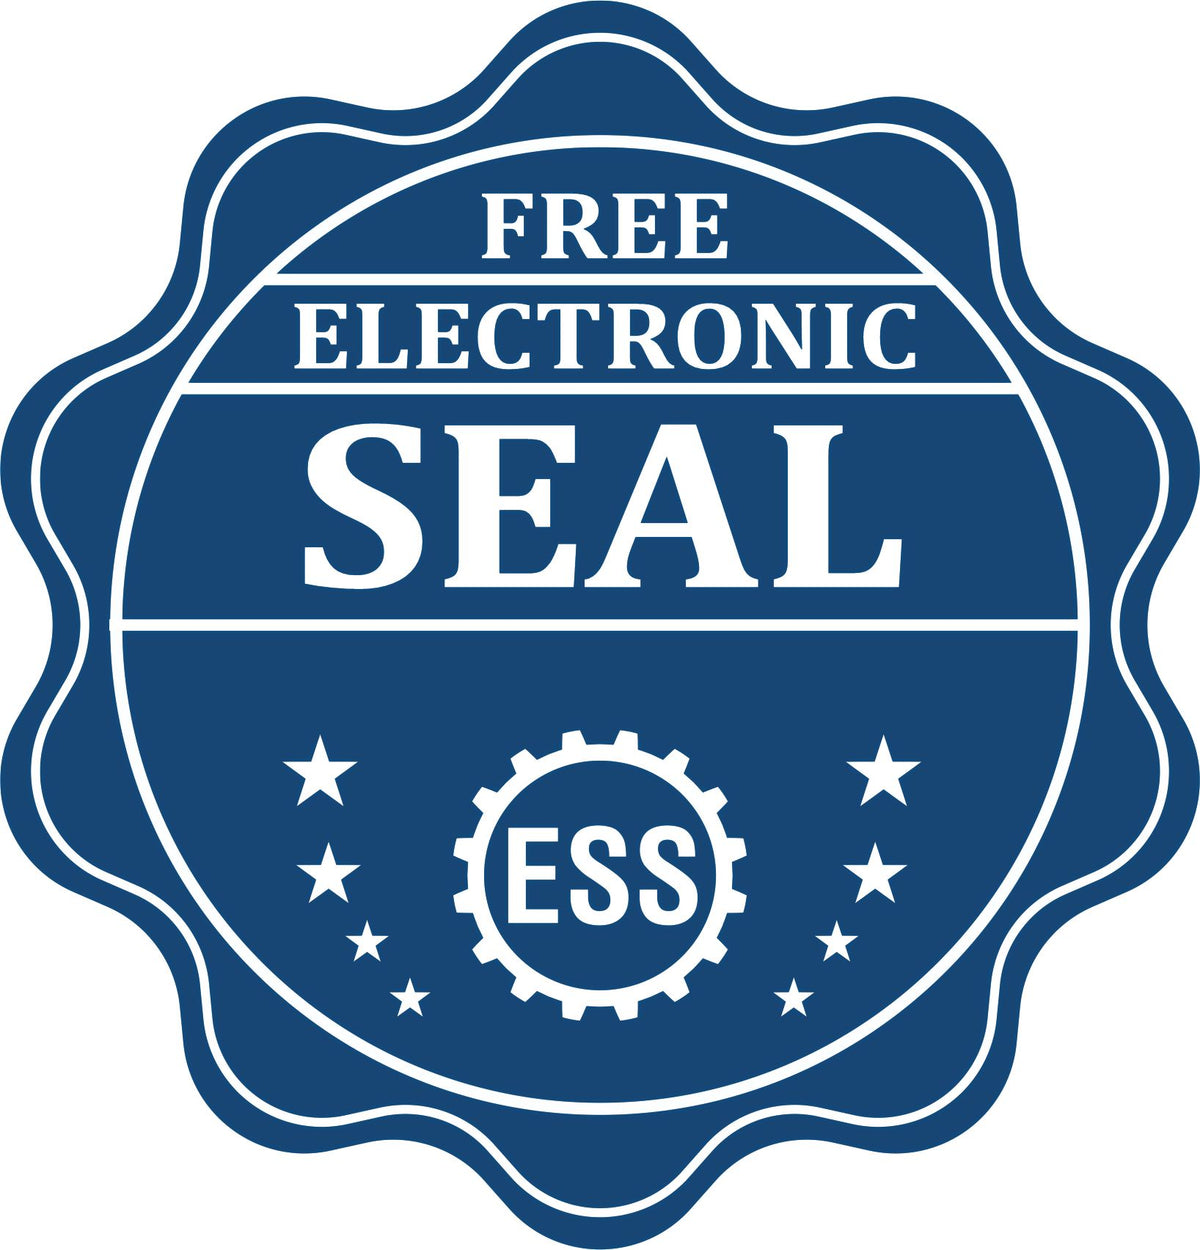 A badge showing a free electronic seal for the Self-Inking Minnesota Landscape Architect Stamp with stars and the ESS gear on the emblem.